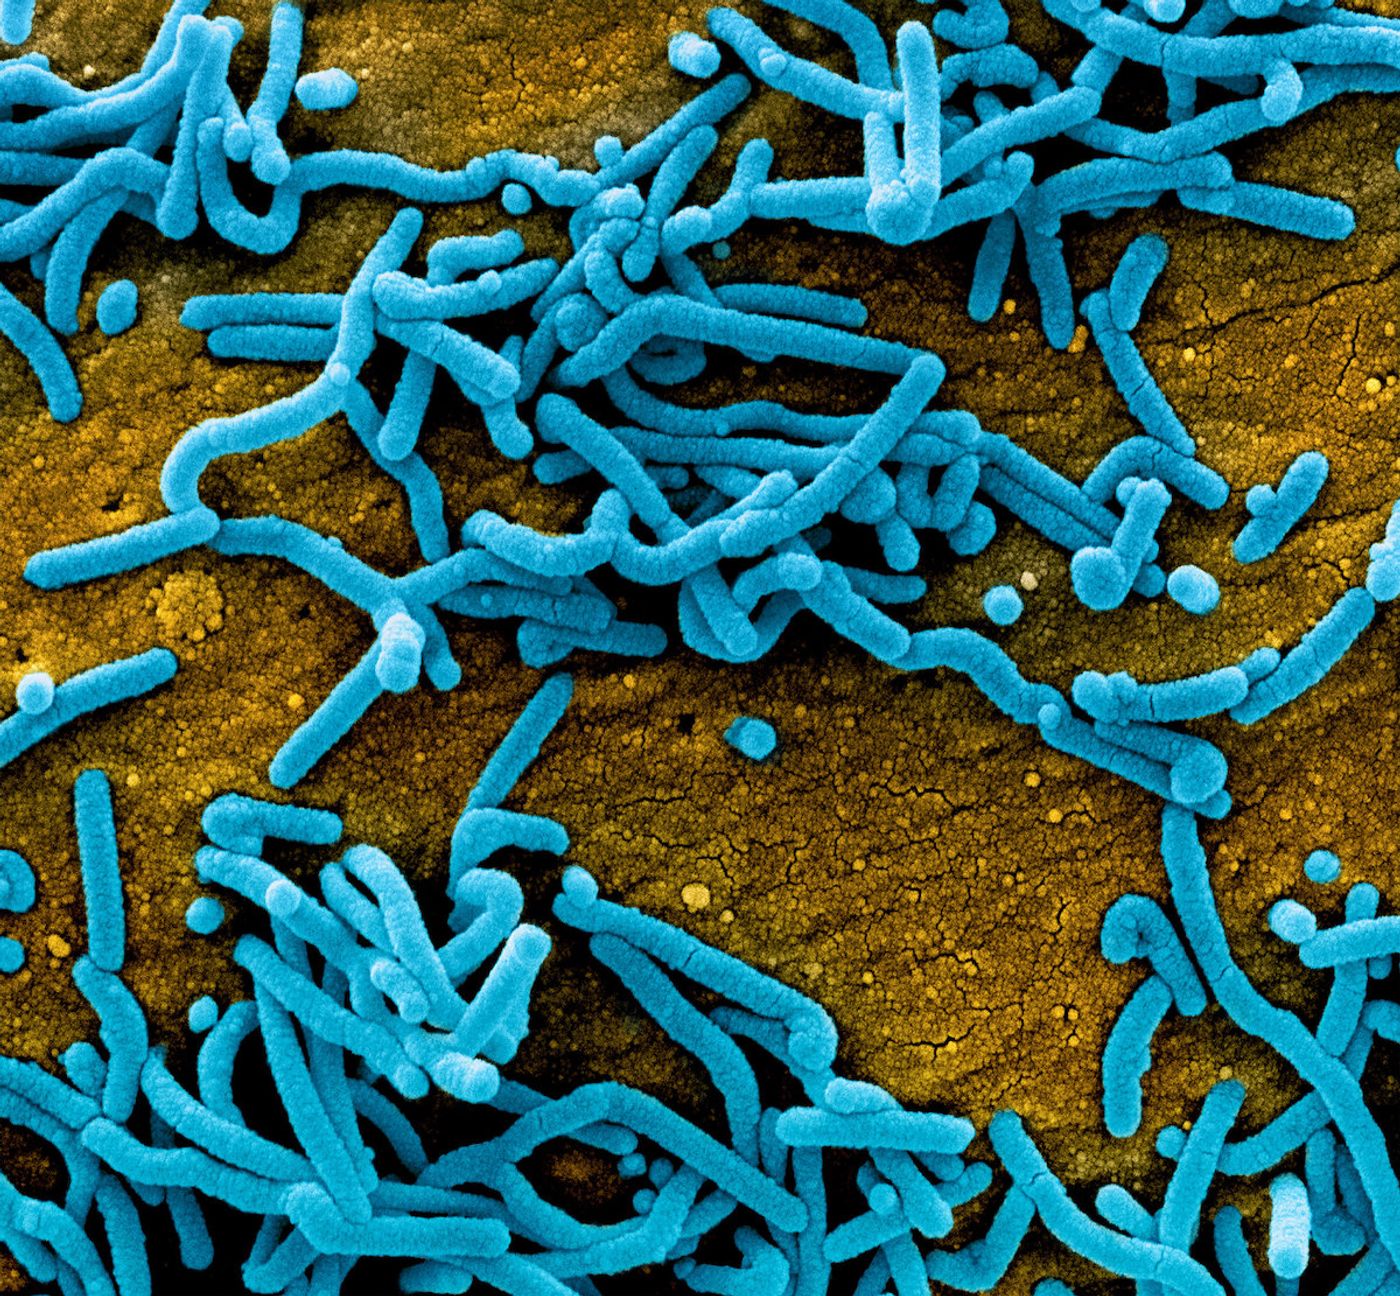   Colorized scanning electron micrograph of Marburg virus particles (blue) both budding and attached to the surface of infected VERO E6 cells (orange). Image captured and color-enhanced at the NIAID Integrated Research Facility in Fort Detrick, Maryland. Credit: NIAID   